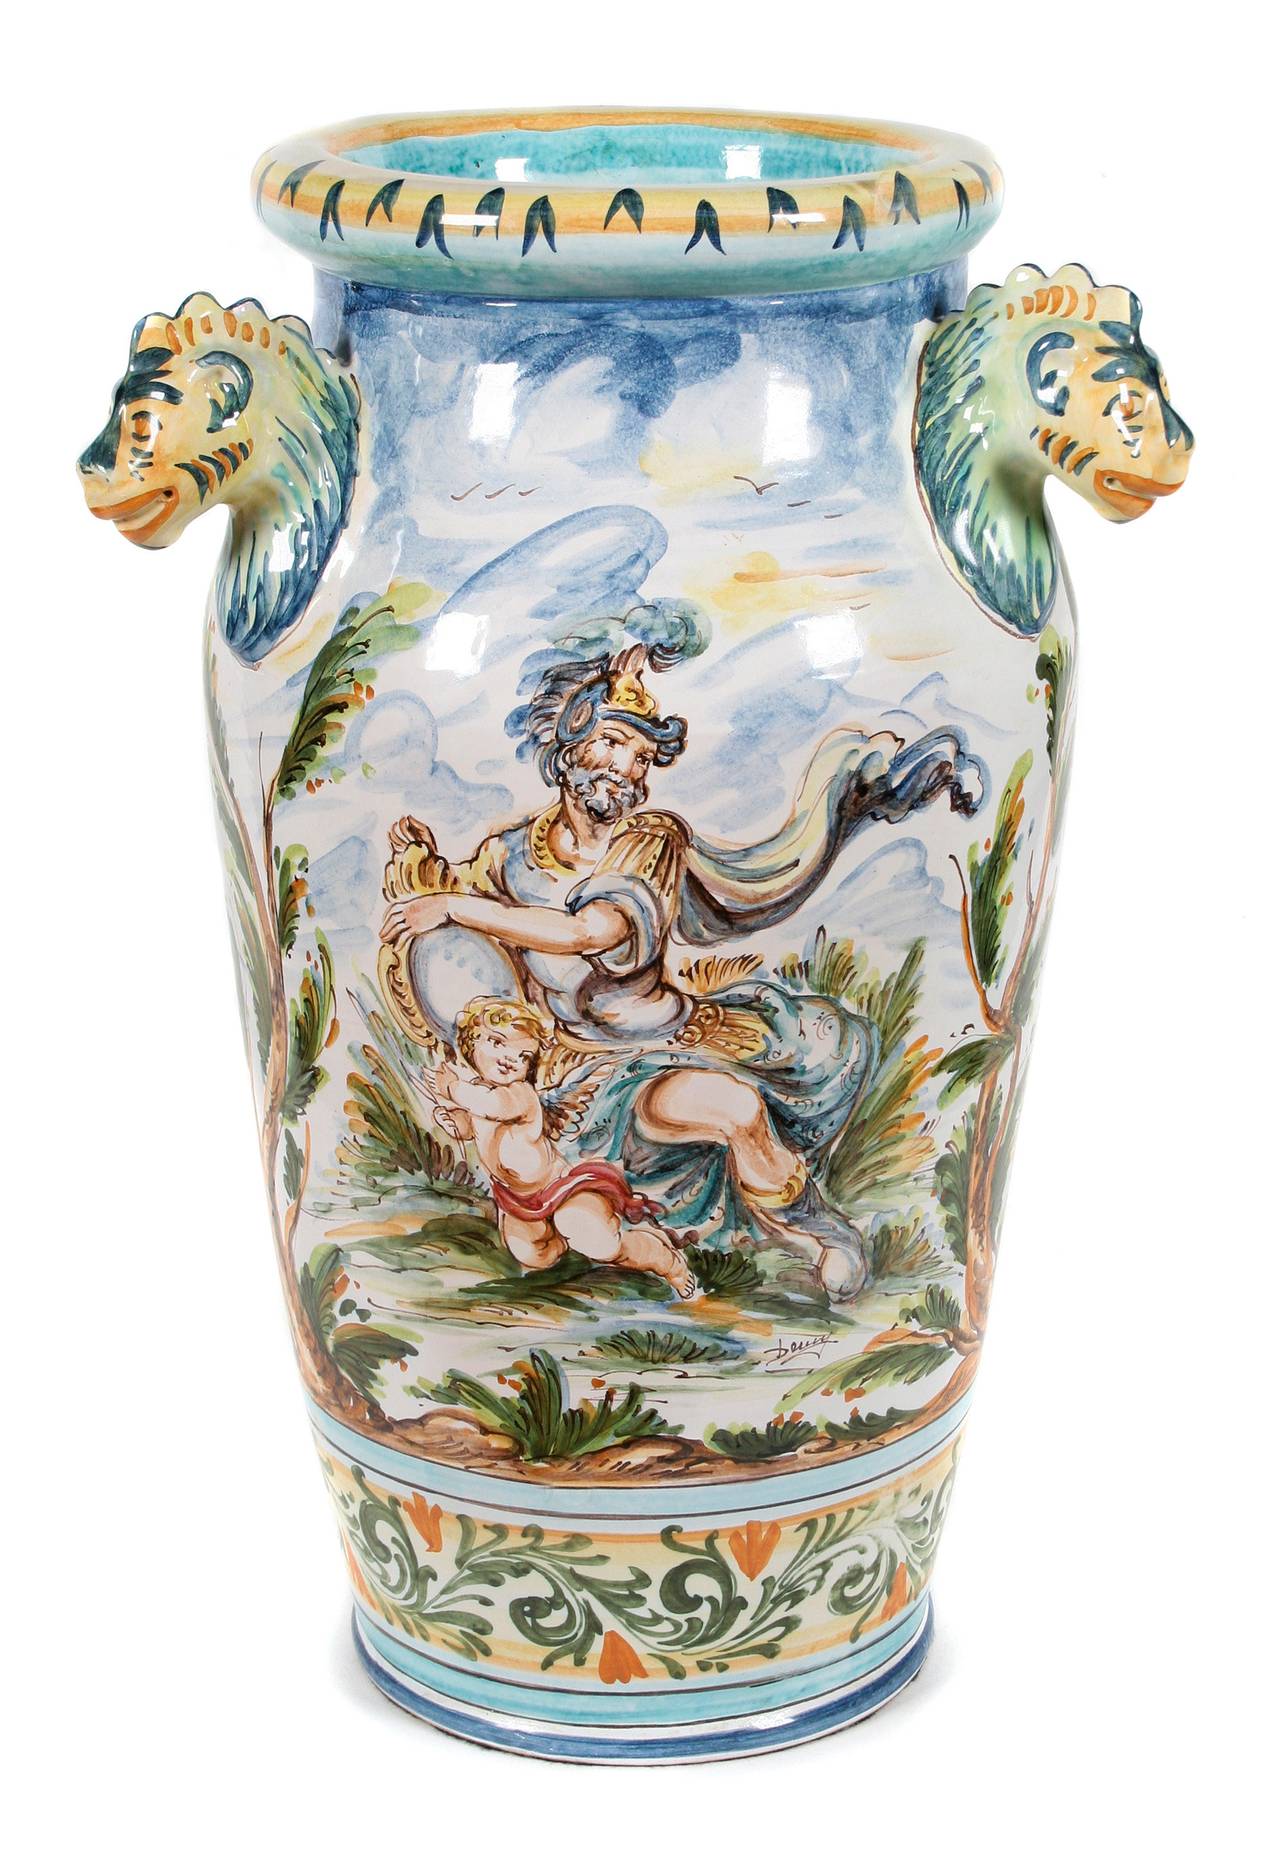 Pair of Large Italian Majolica Vases by Giuseppe Mazzotti, circa 1930 In Excellent Condition For Sale In Chicago, IL